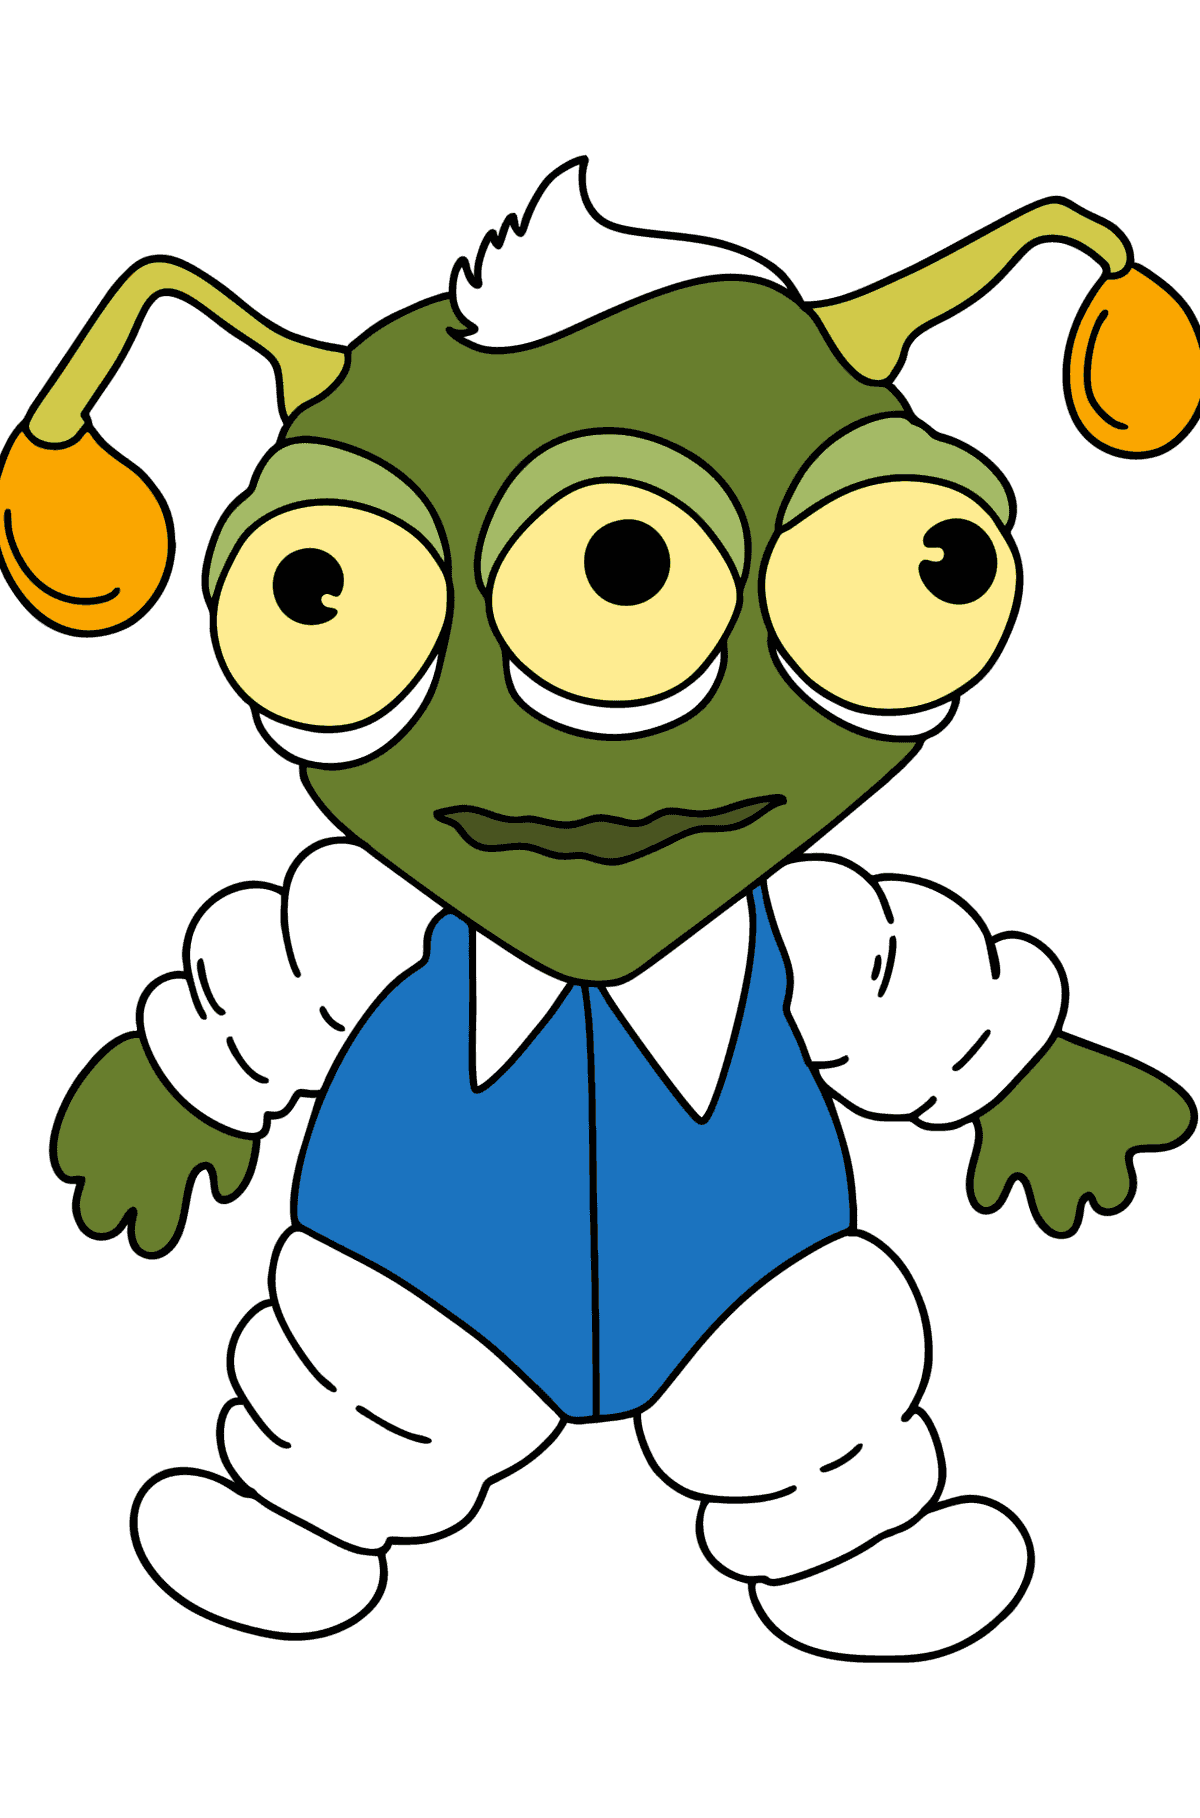 Cartoon Alien Coloring page - Coloring Pages for Kids